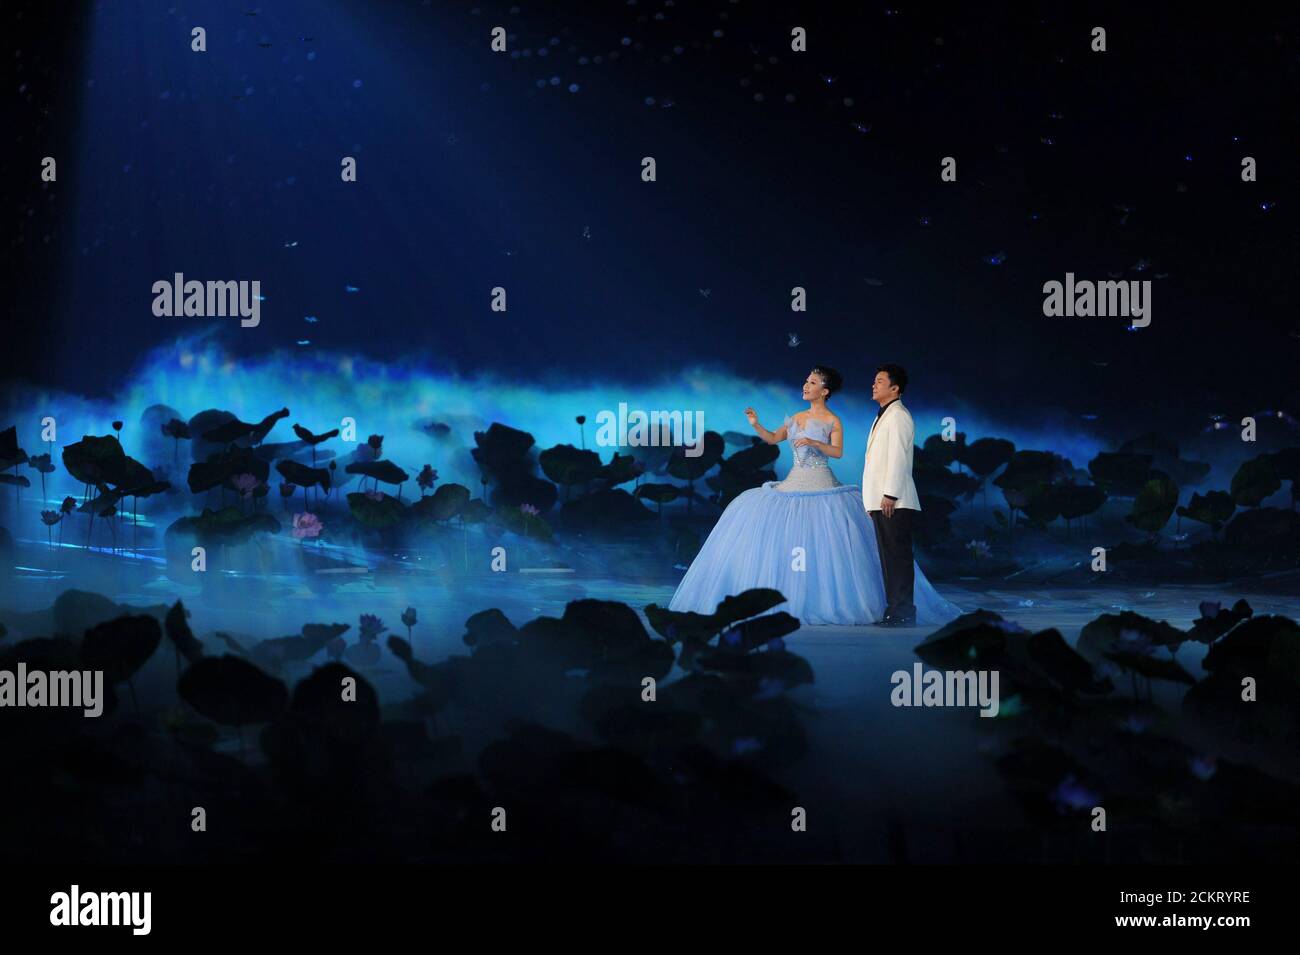 Beijing, China  September 6, 2008: Chinese singers Tan Jing (left) and Fan Jingma (right) perform at the Opening Ceremonies of the Beijing Paralympics at China's National Stadium, known as the Bird's Nest.  ©Bob Daemmrich Stock Photo